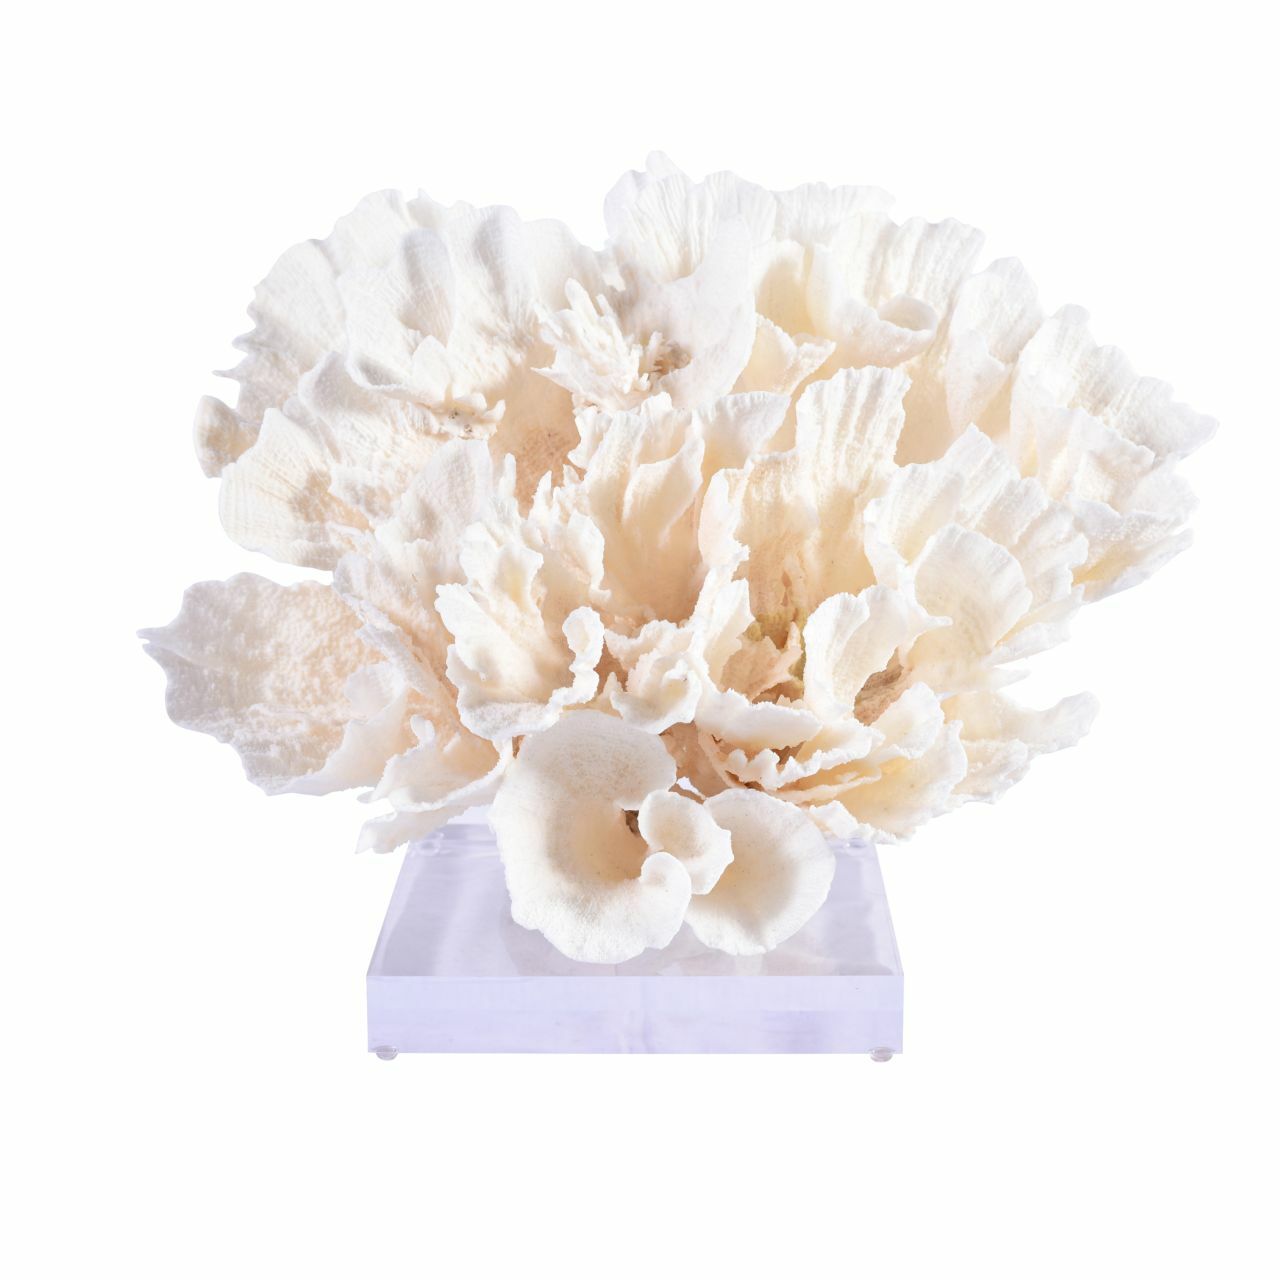 Legend of Asia Giftware Legend of Asia Poca Coral Full Shape 10-12 Inch On Acrylic Base